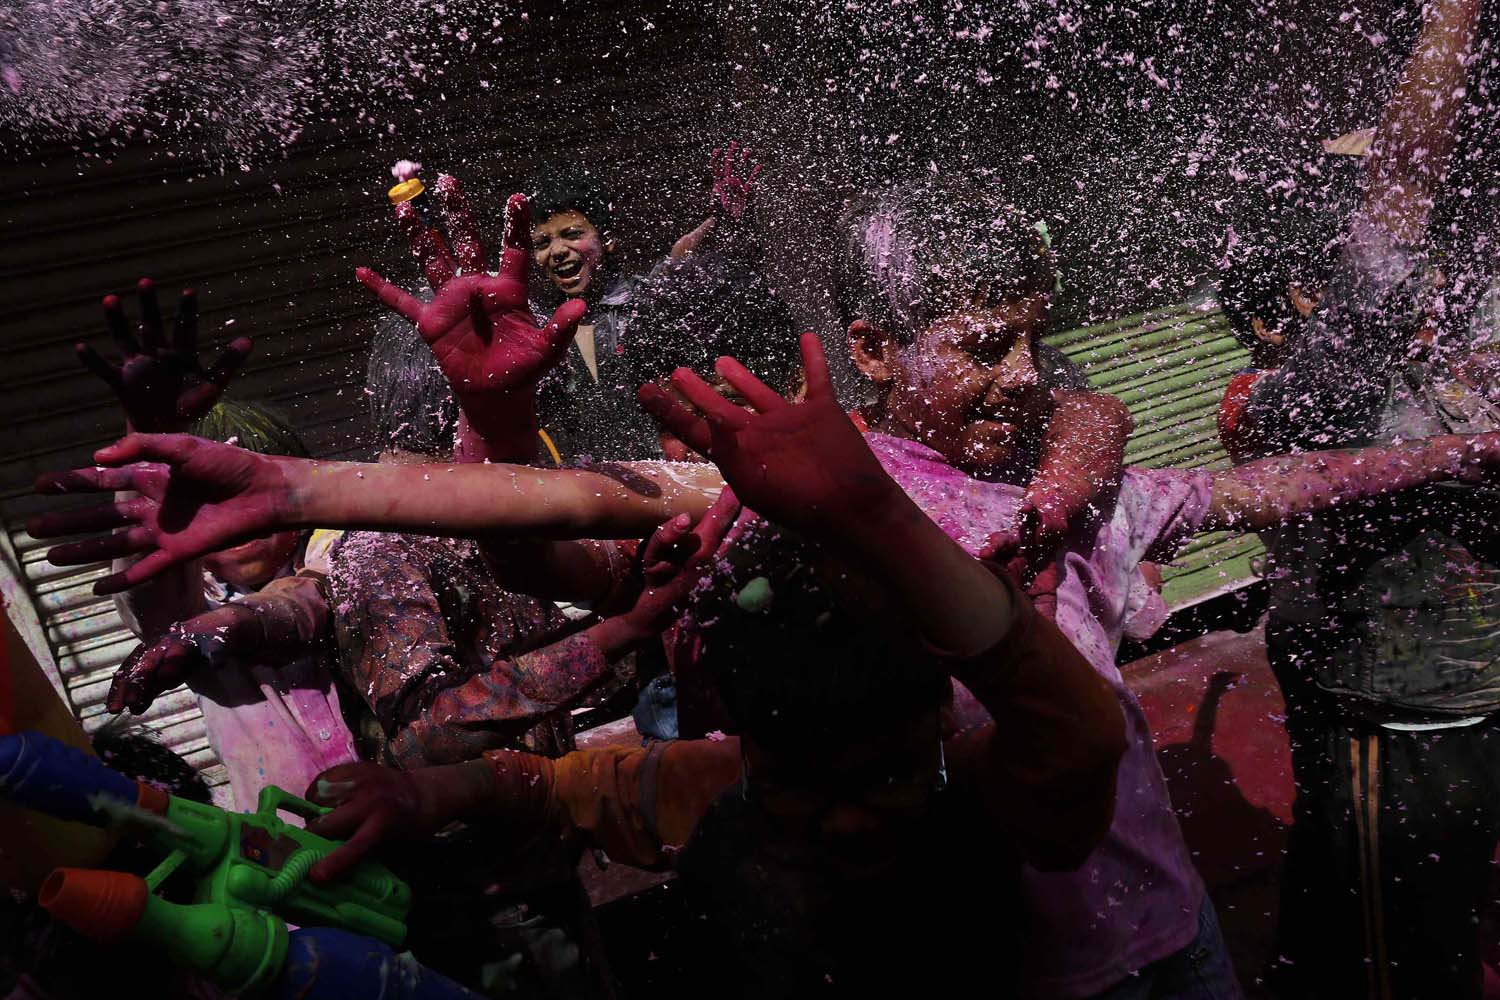 March 26, 2013. Boys spray coloured foam during Holi celebrations at a lane near the Bankey Bihari temple in Vrindavan, in the northern Indian state of Uttar Pradesh.